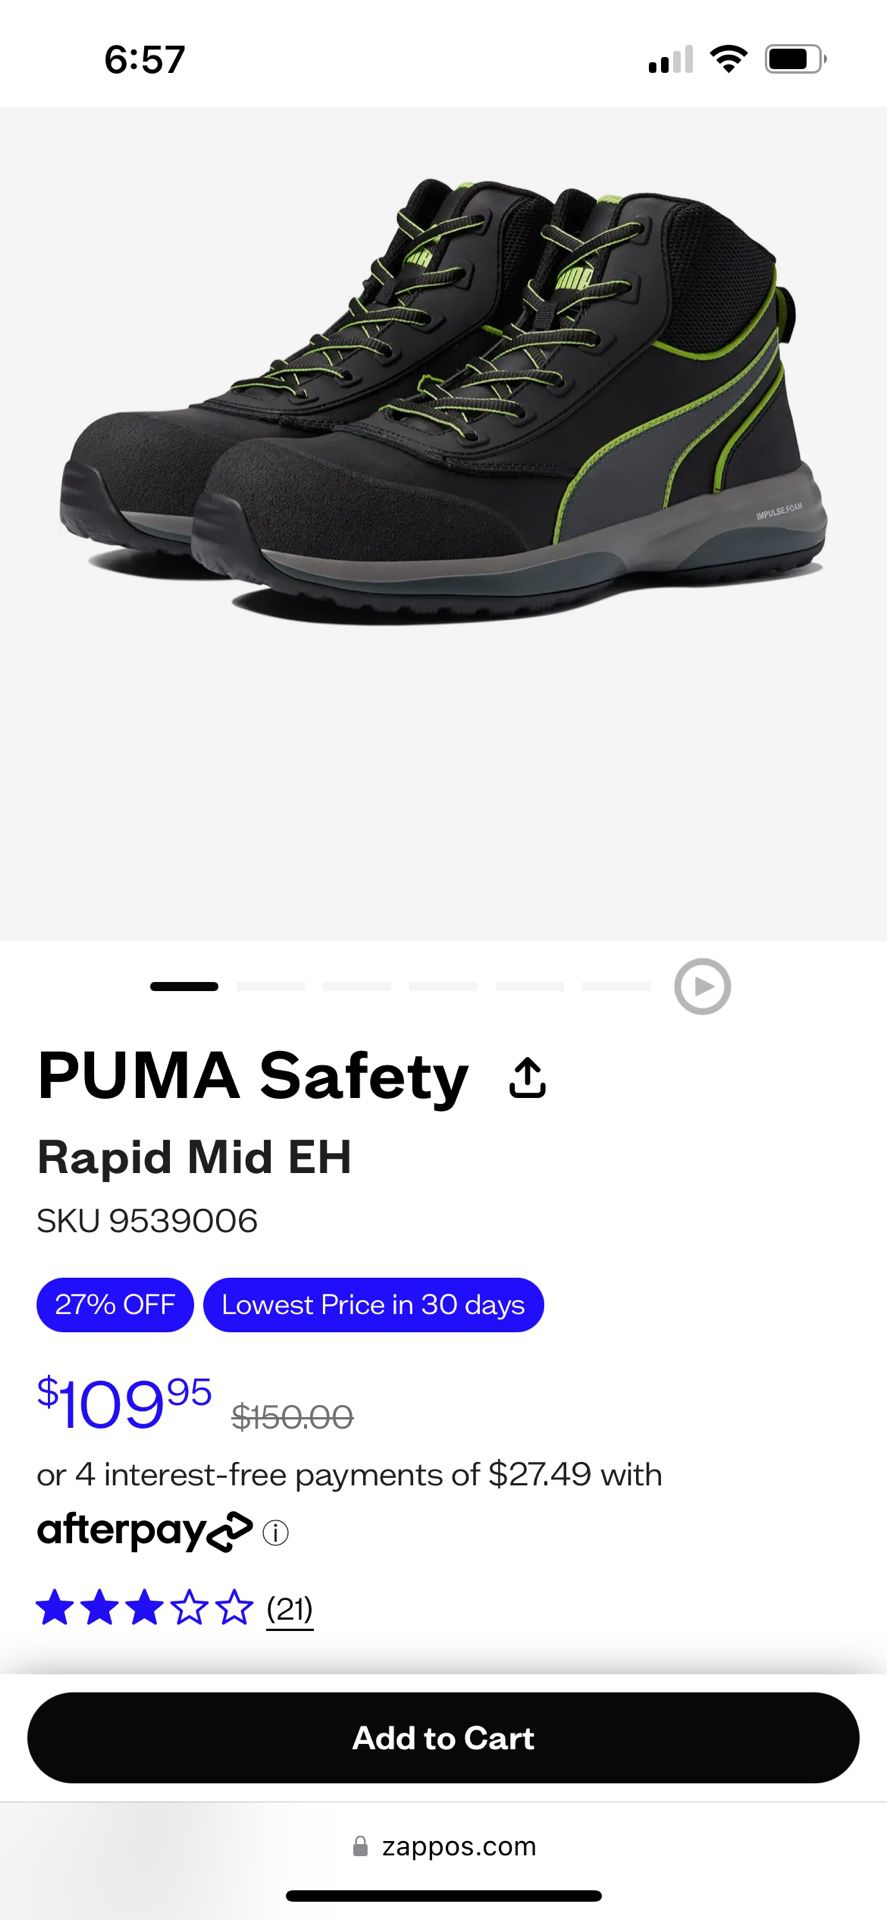 PUMA® Safety Rapid Mid EH work boots